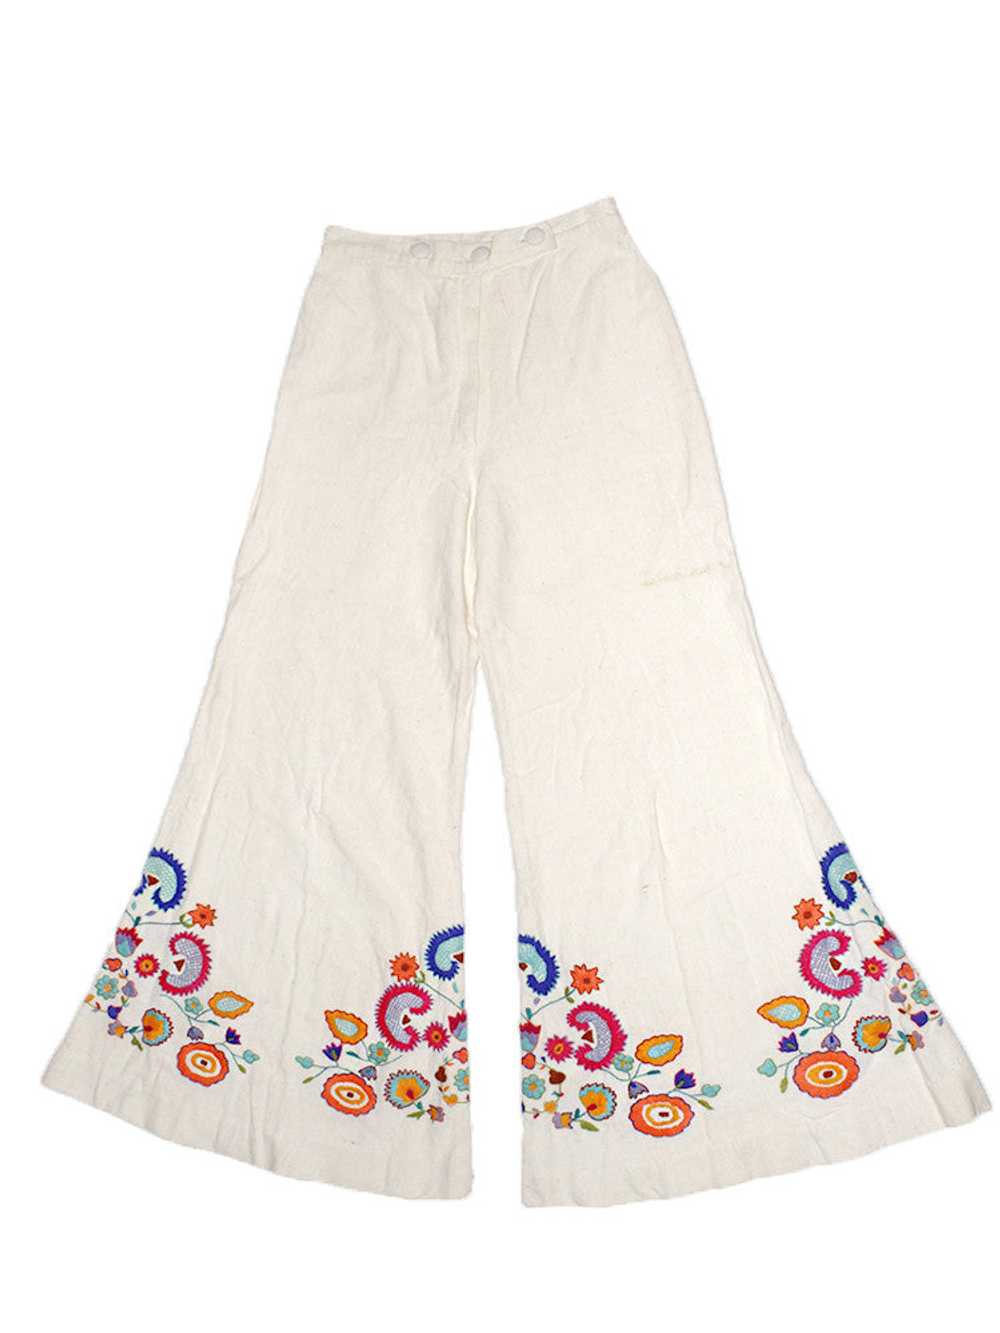 Vintage 70's Hand Embroidered Bell Bottoms - image 1